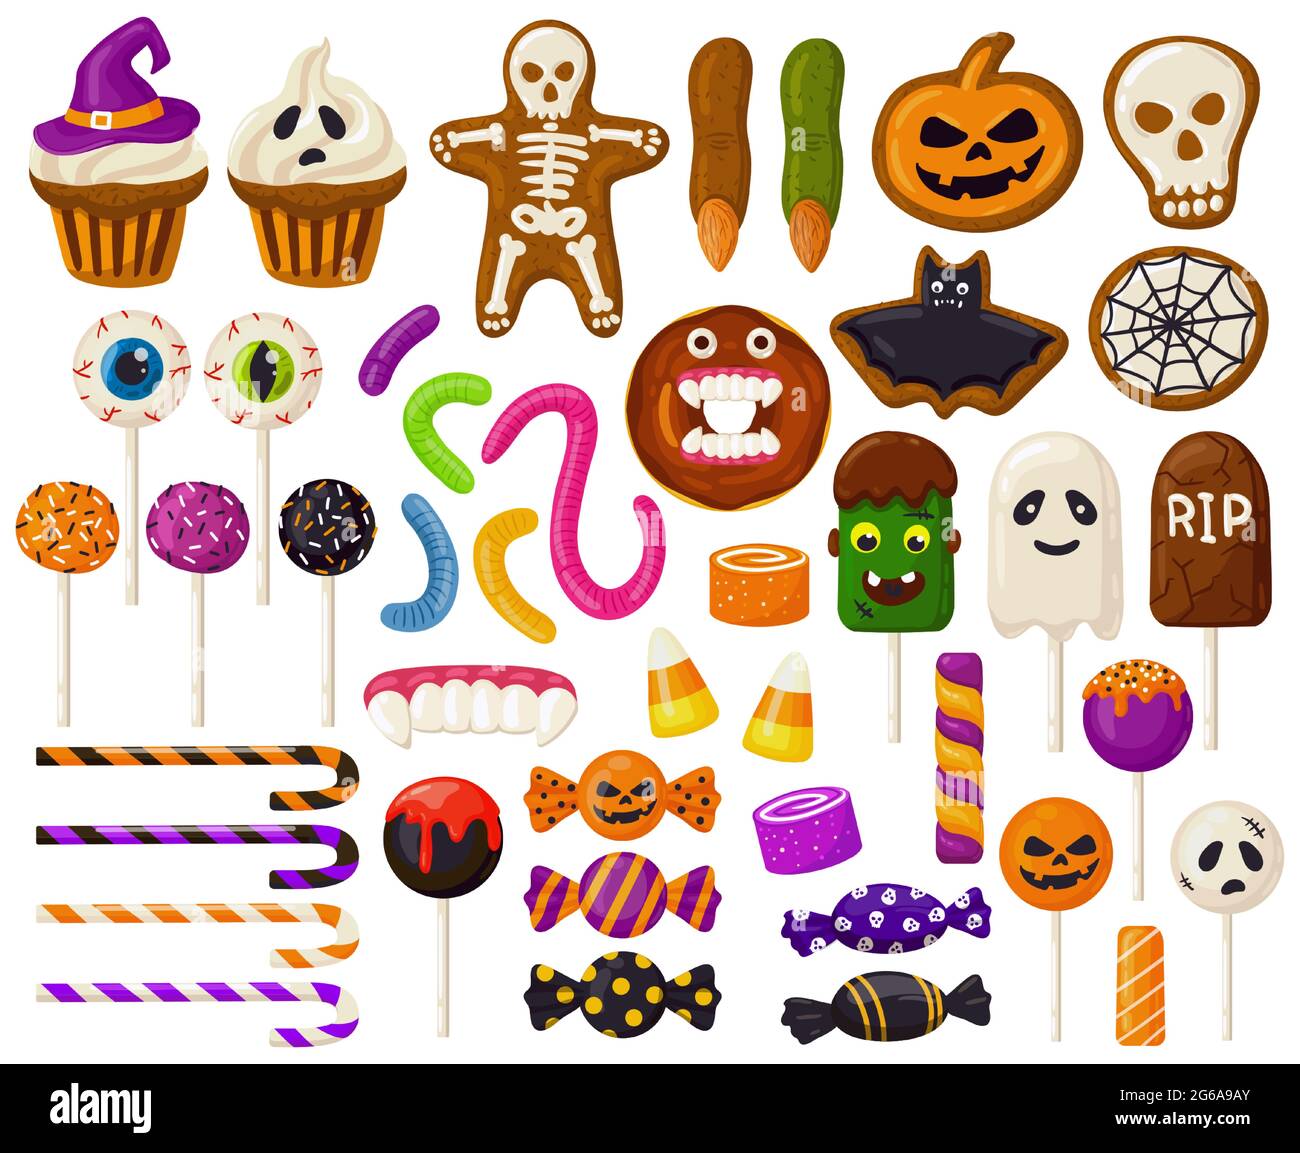 Halloween sweets. Cartoon halloween candies, spooky lollipops, cupcakes and scary jelly sweets vector illustration set. Trick or treat halloween Stock Vector